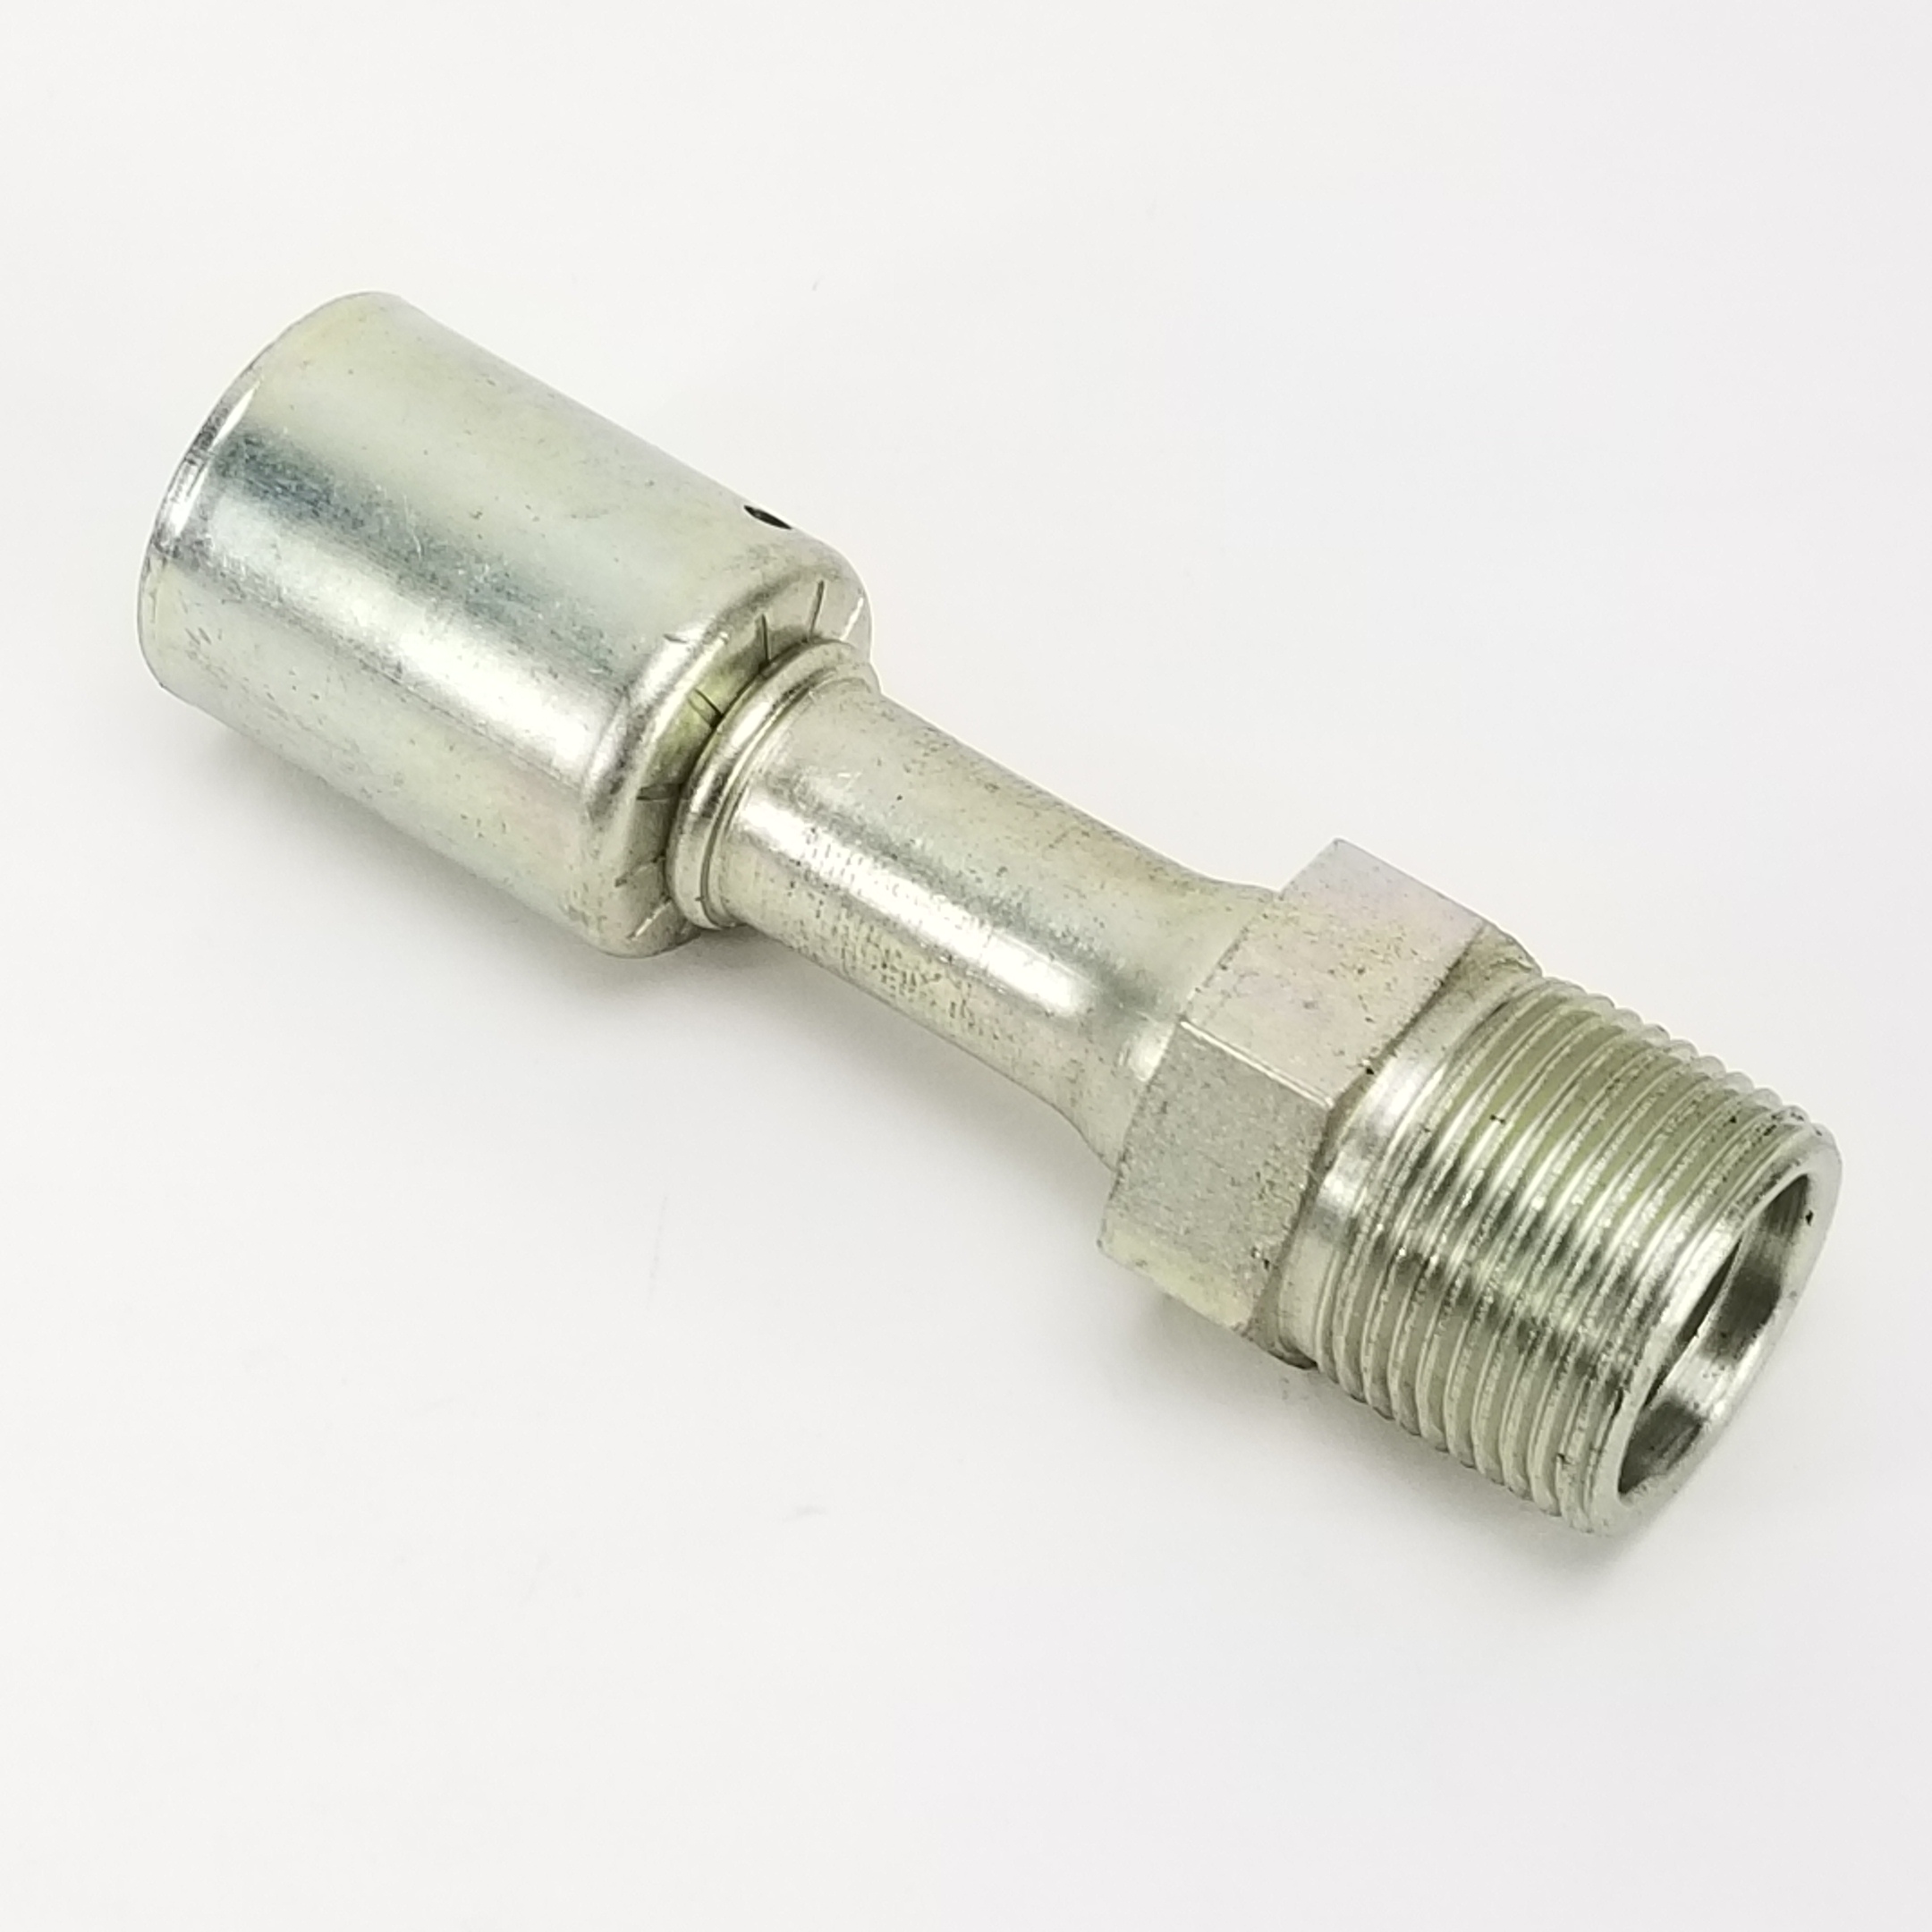 12 Male Insert O-ring to #10 Standard Hose Fitting - WARR Performance  64-0004 - WARR Performance LLC